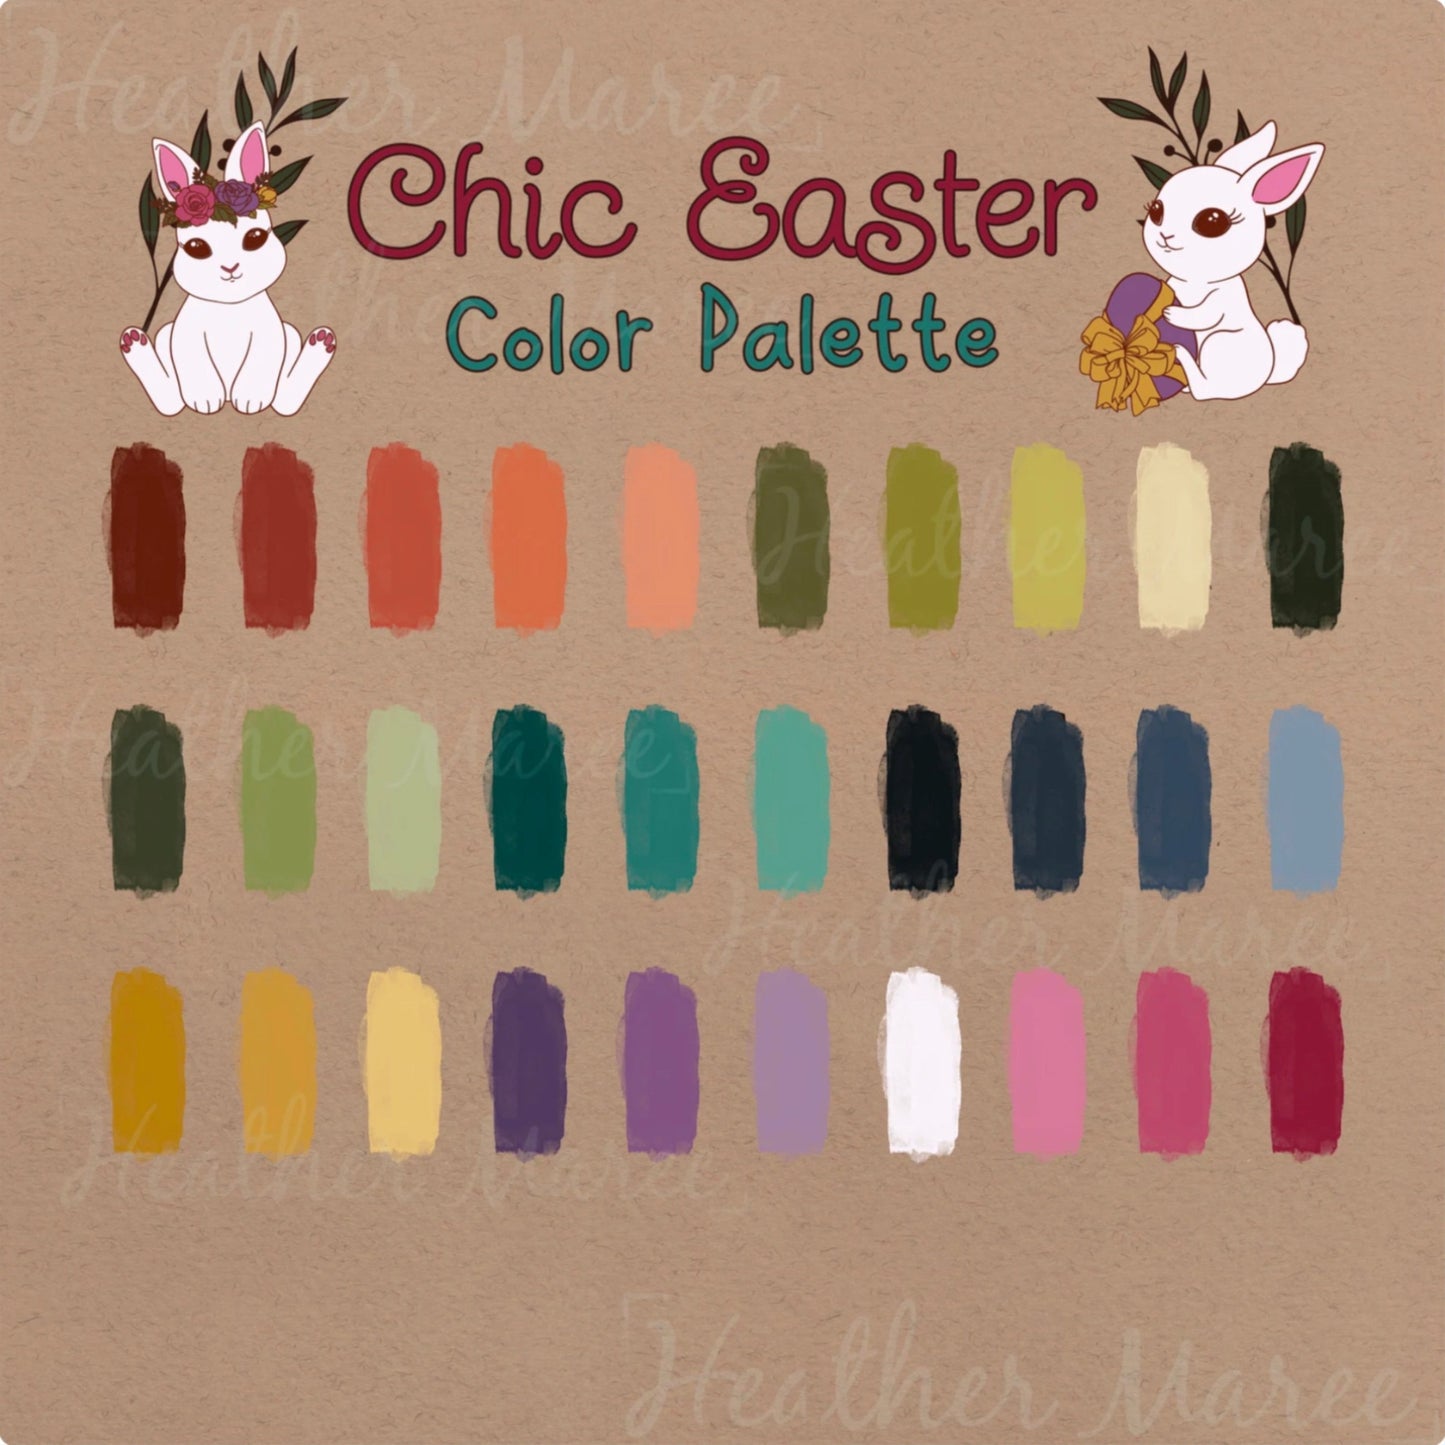 Chic Easter Color Palette